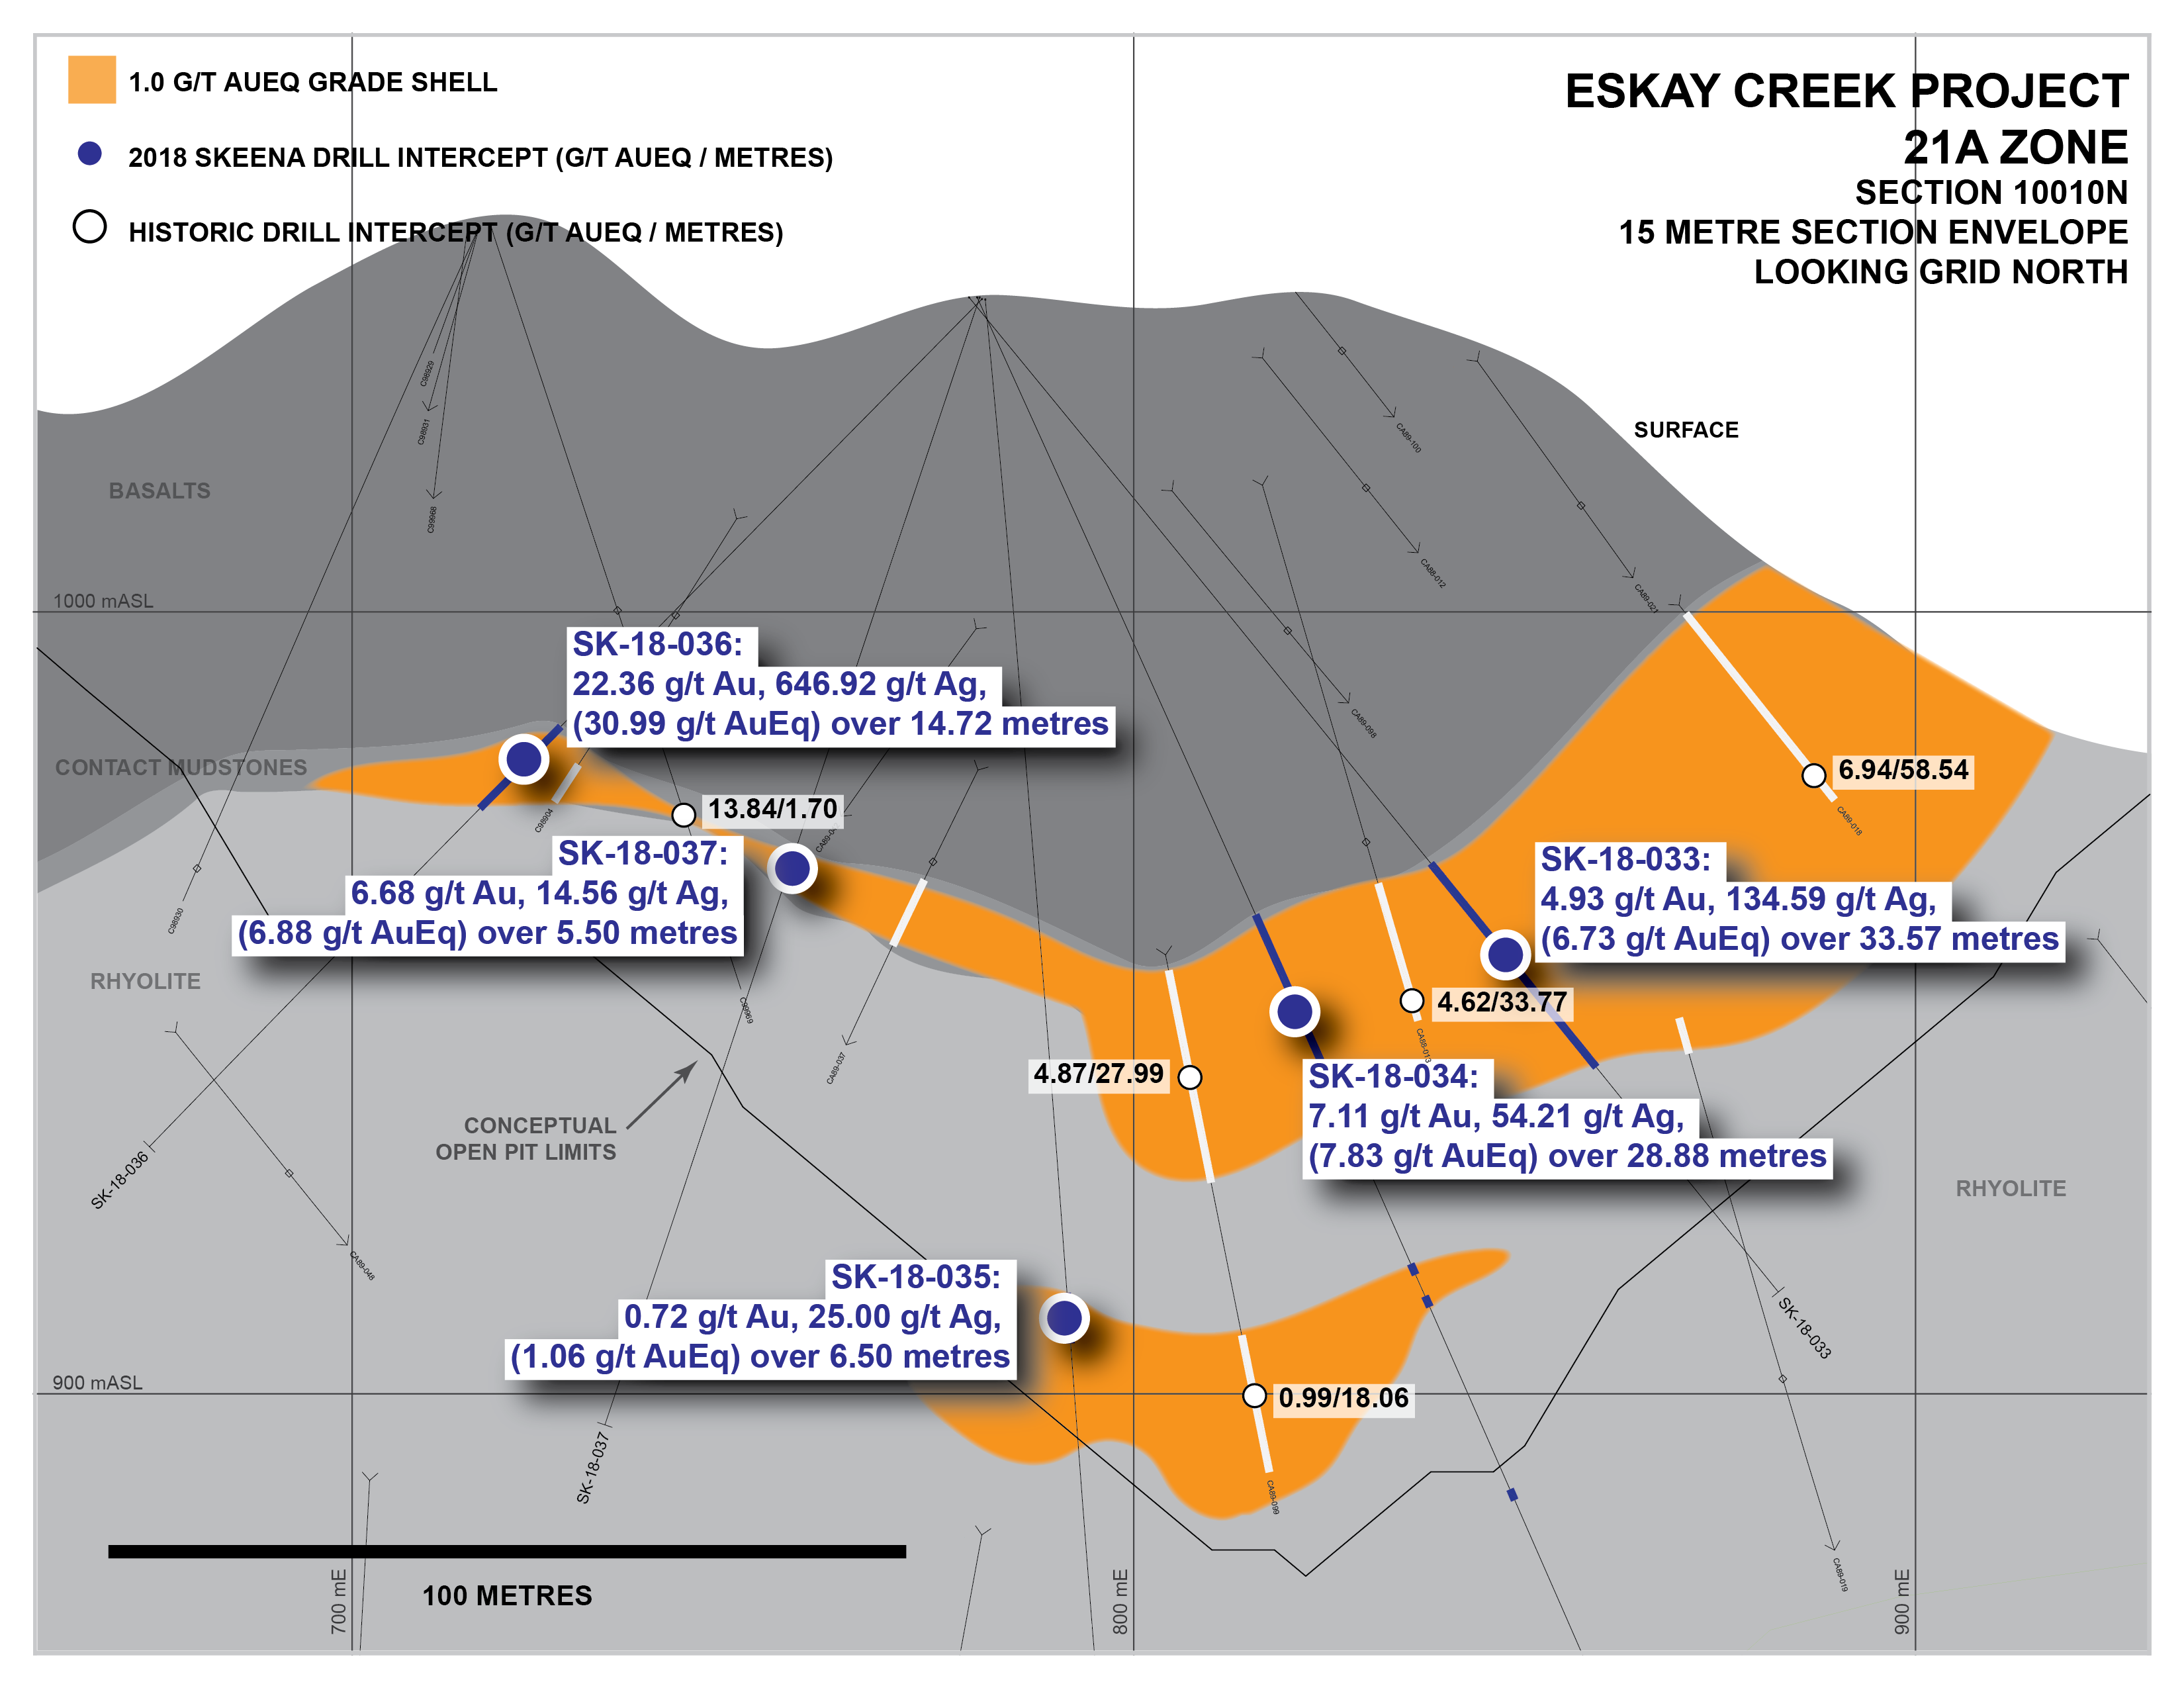 eskay_20creek_20project-_2021a_20zone_20section_2010010n-20190114145516.png